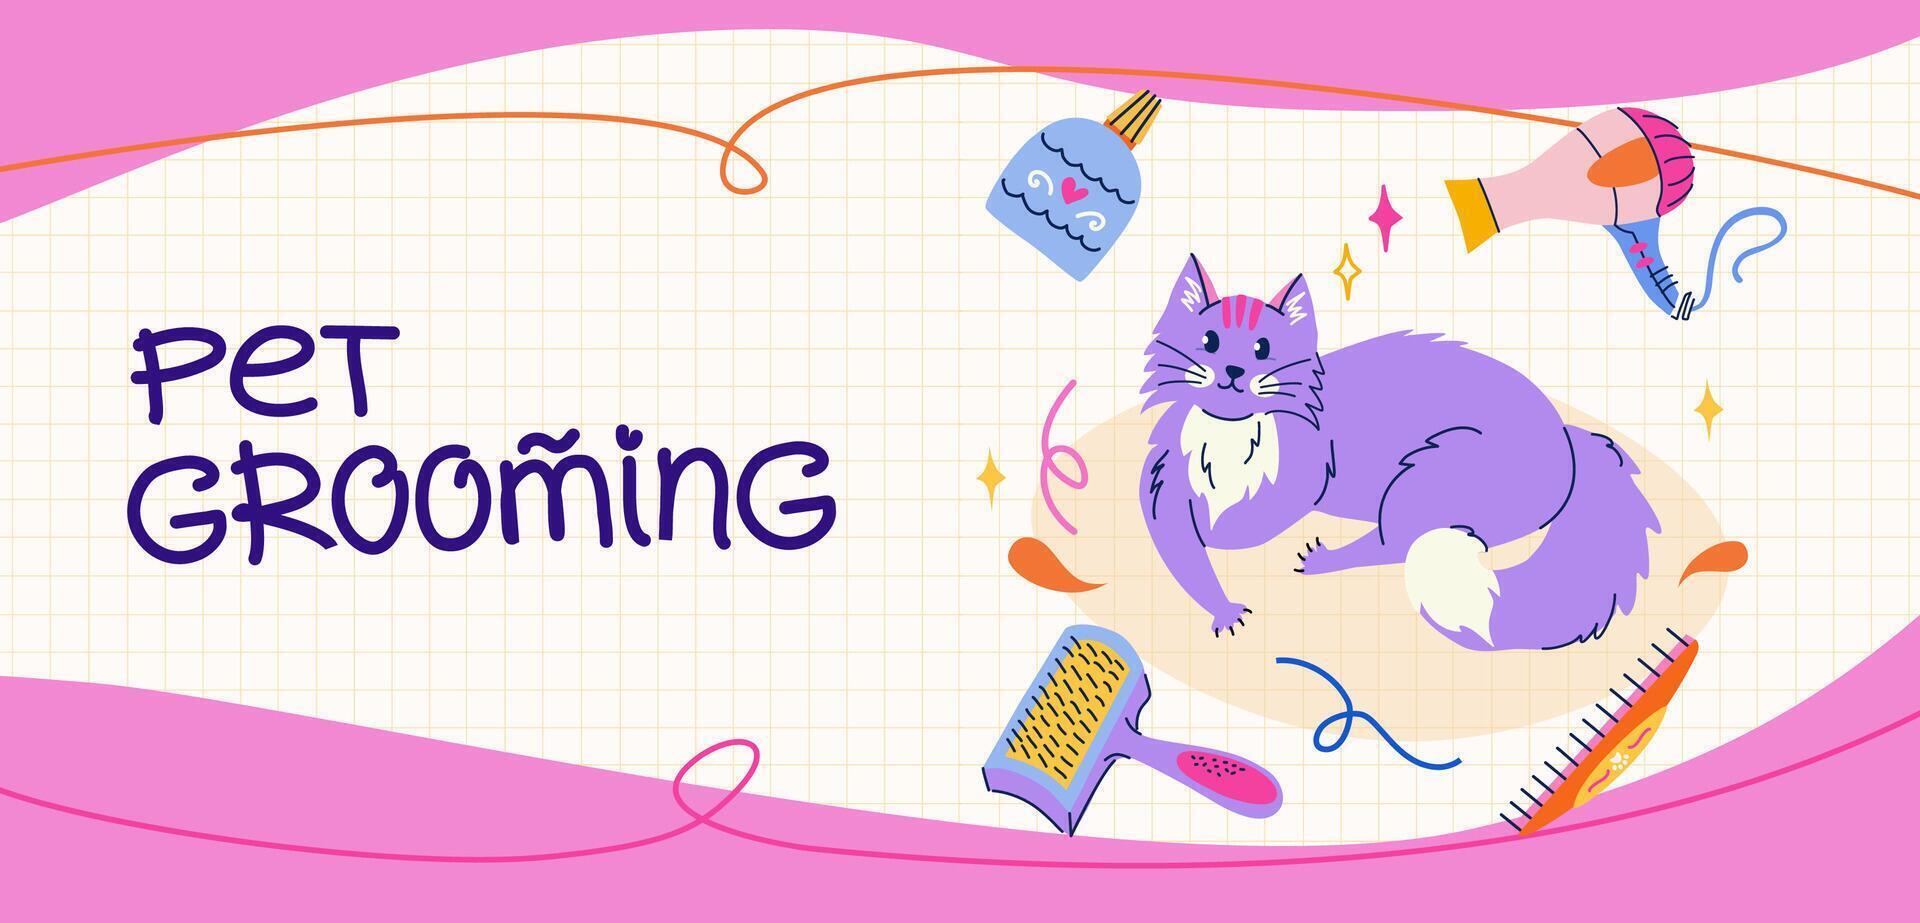 Pet grooming website banner design. Cute lying cat in flat trendy style. Equipment and cosmetics for grooming. Vector template with handwritten typography